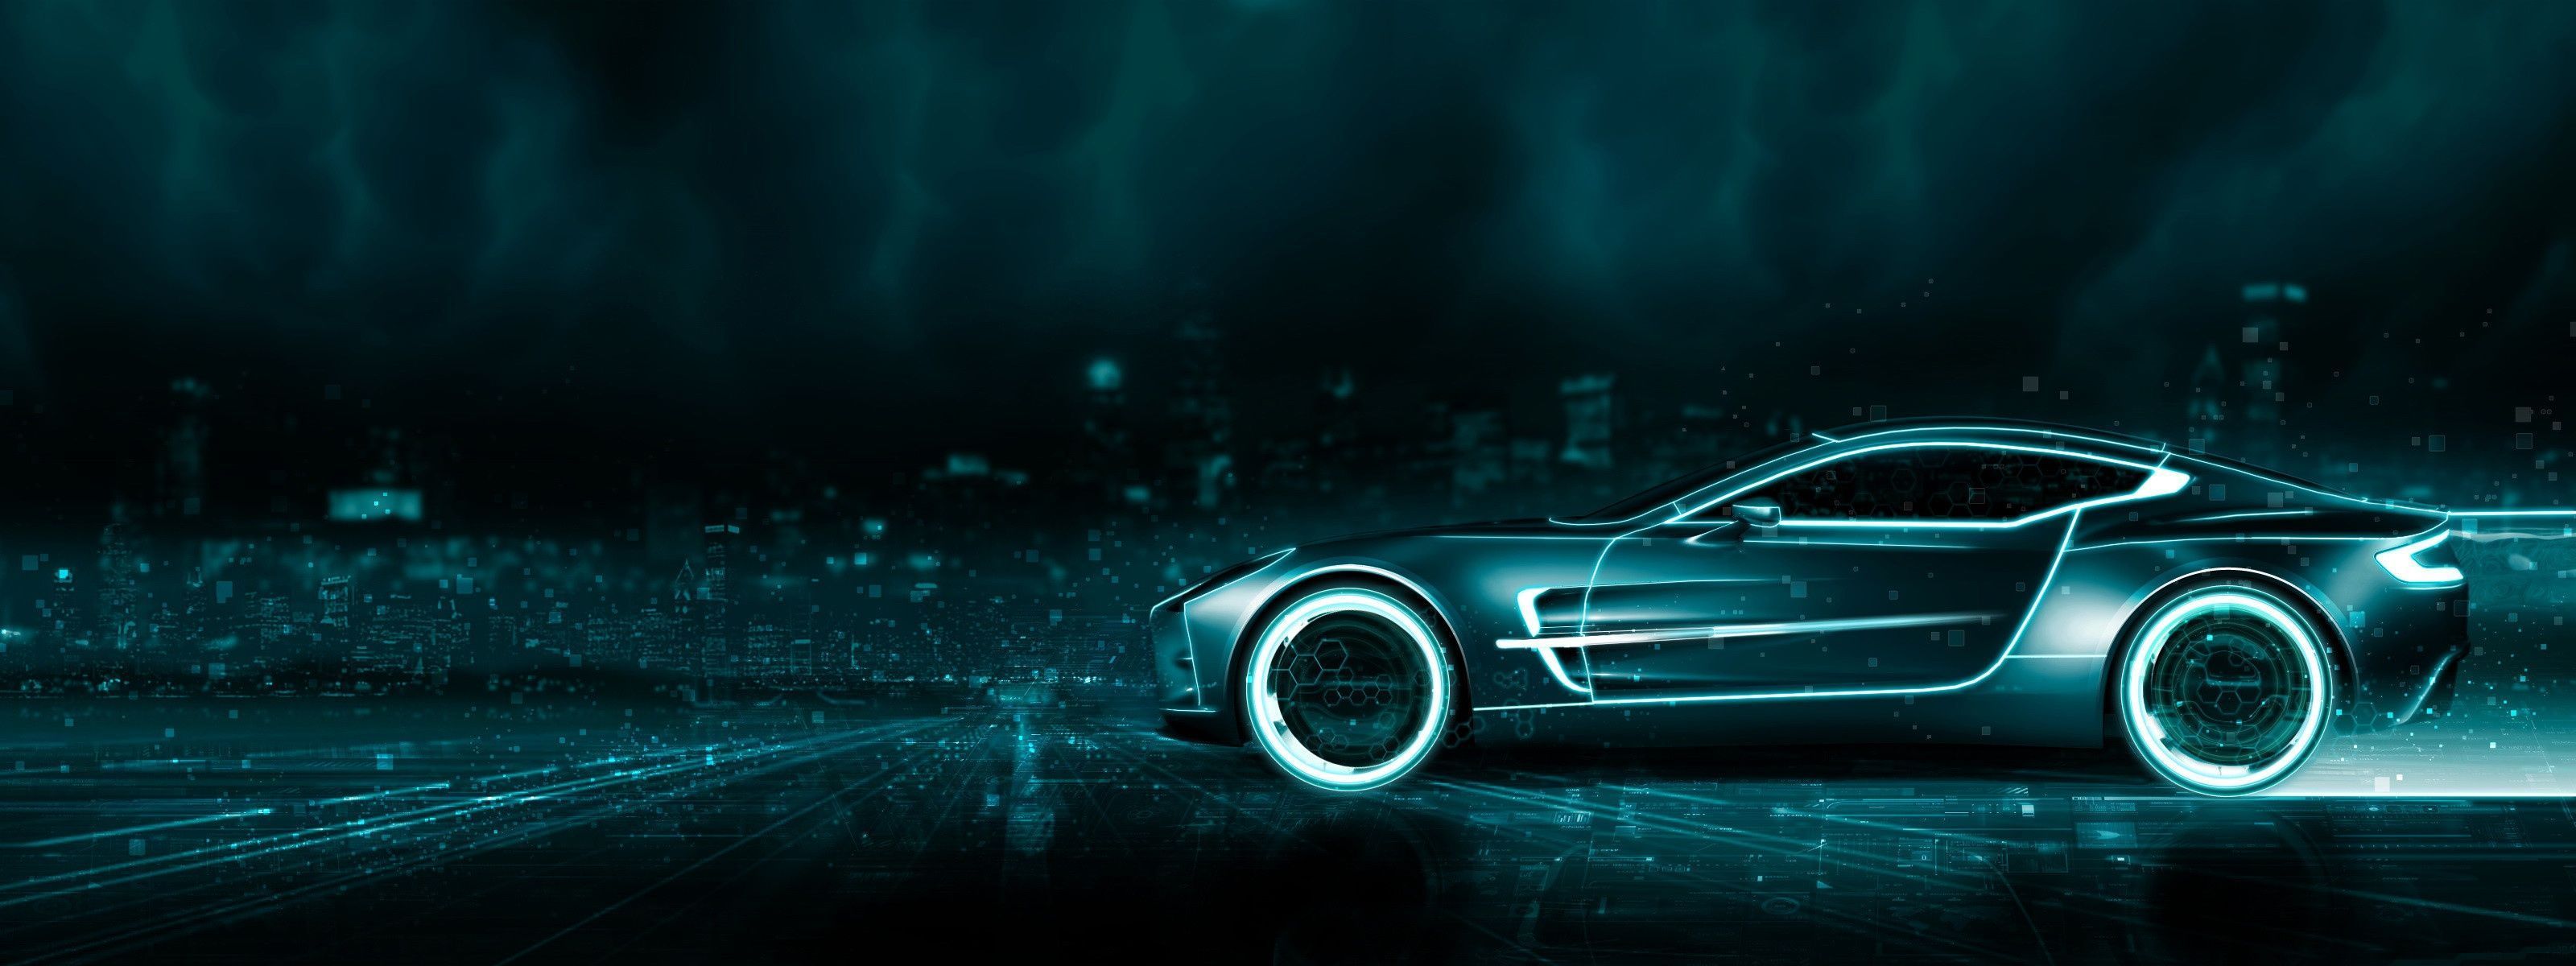 Wallpapers Tagged With TRON | TRON HD Wallpapers | Page 1